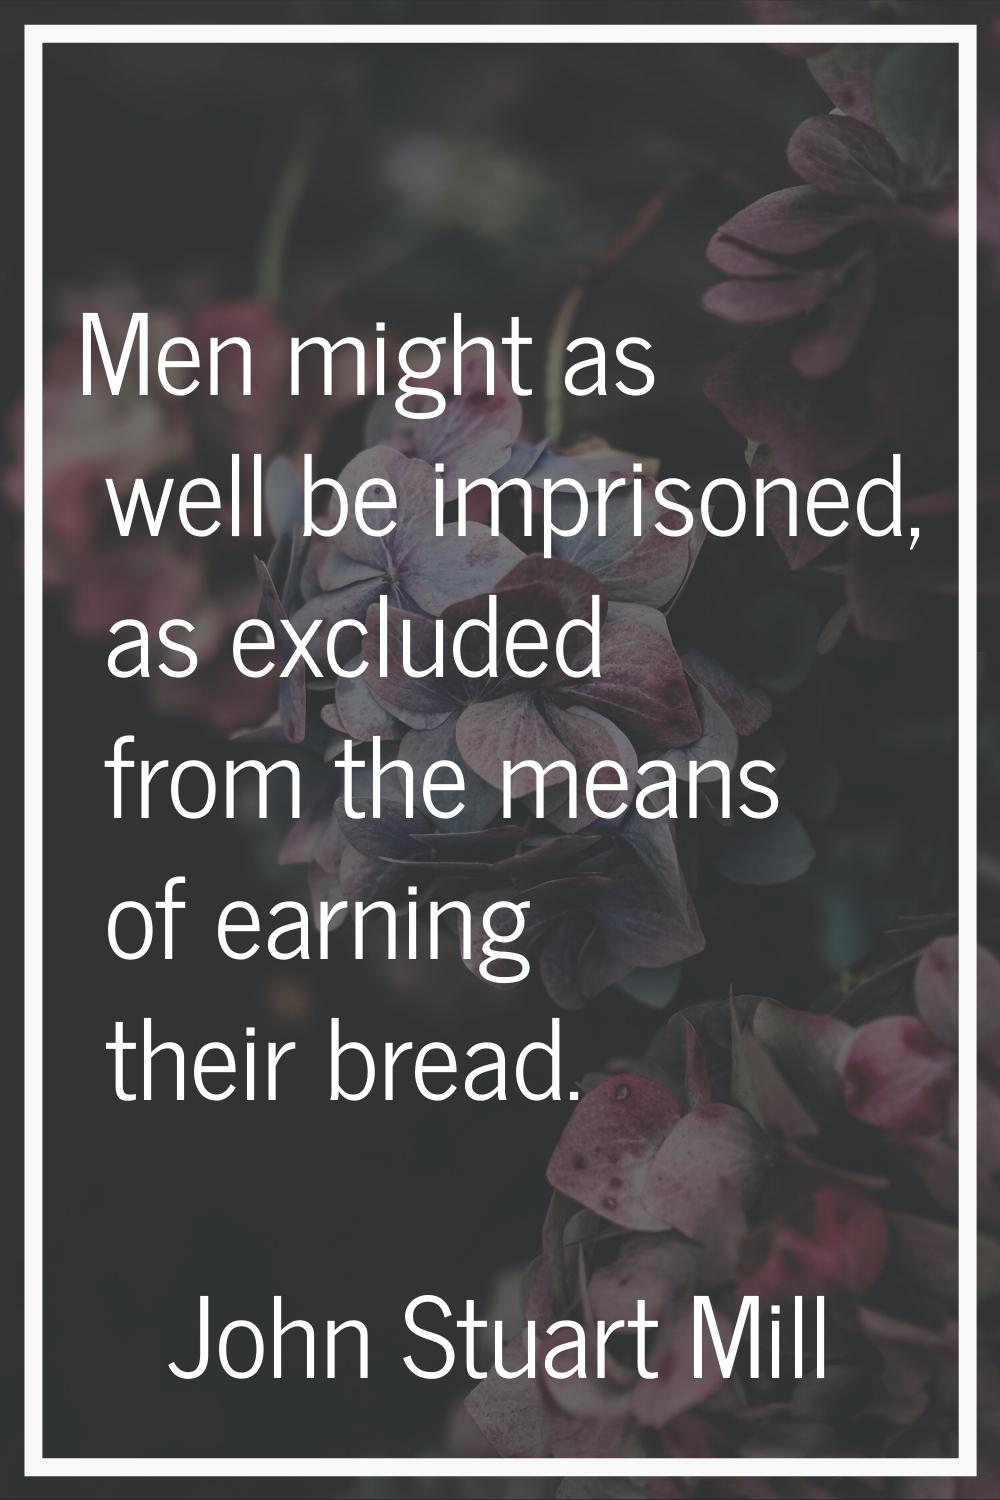 Men might as well be imprisoned, as excluded from the means of earning their bread.